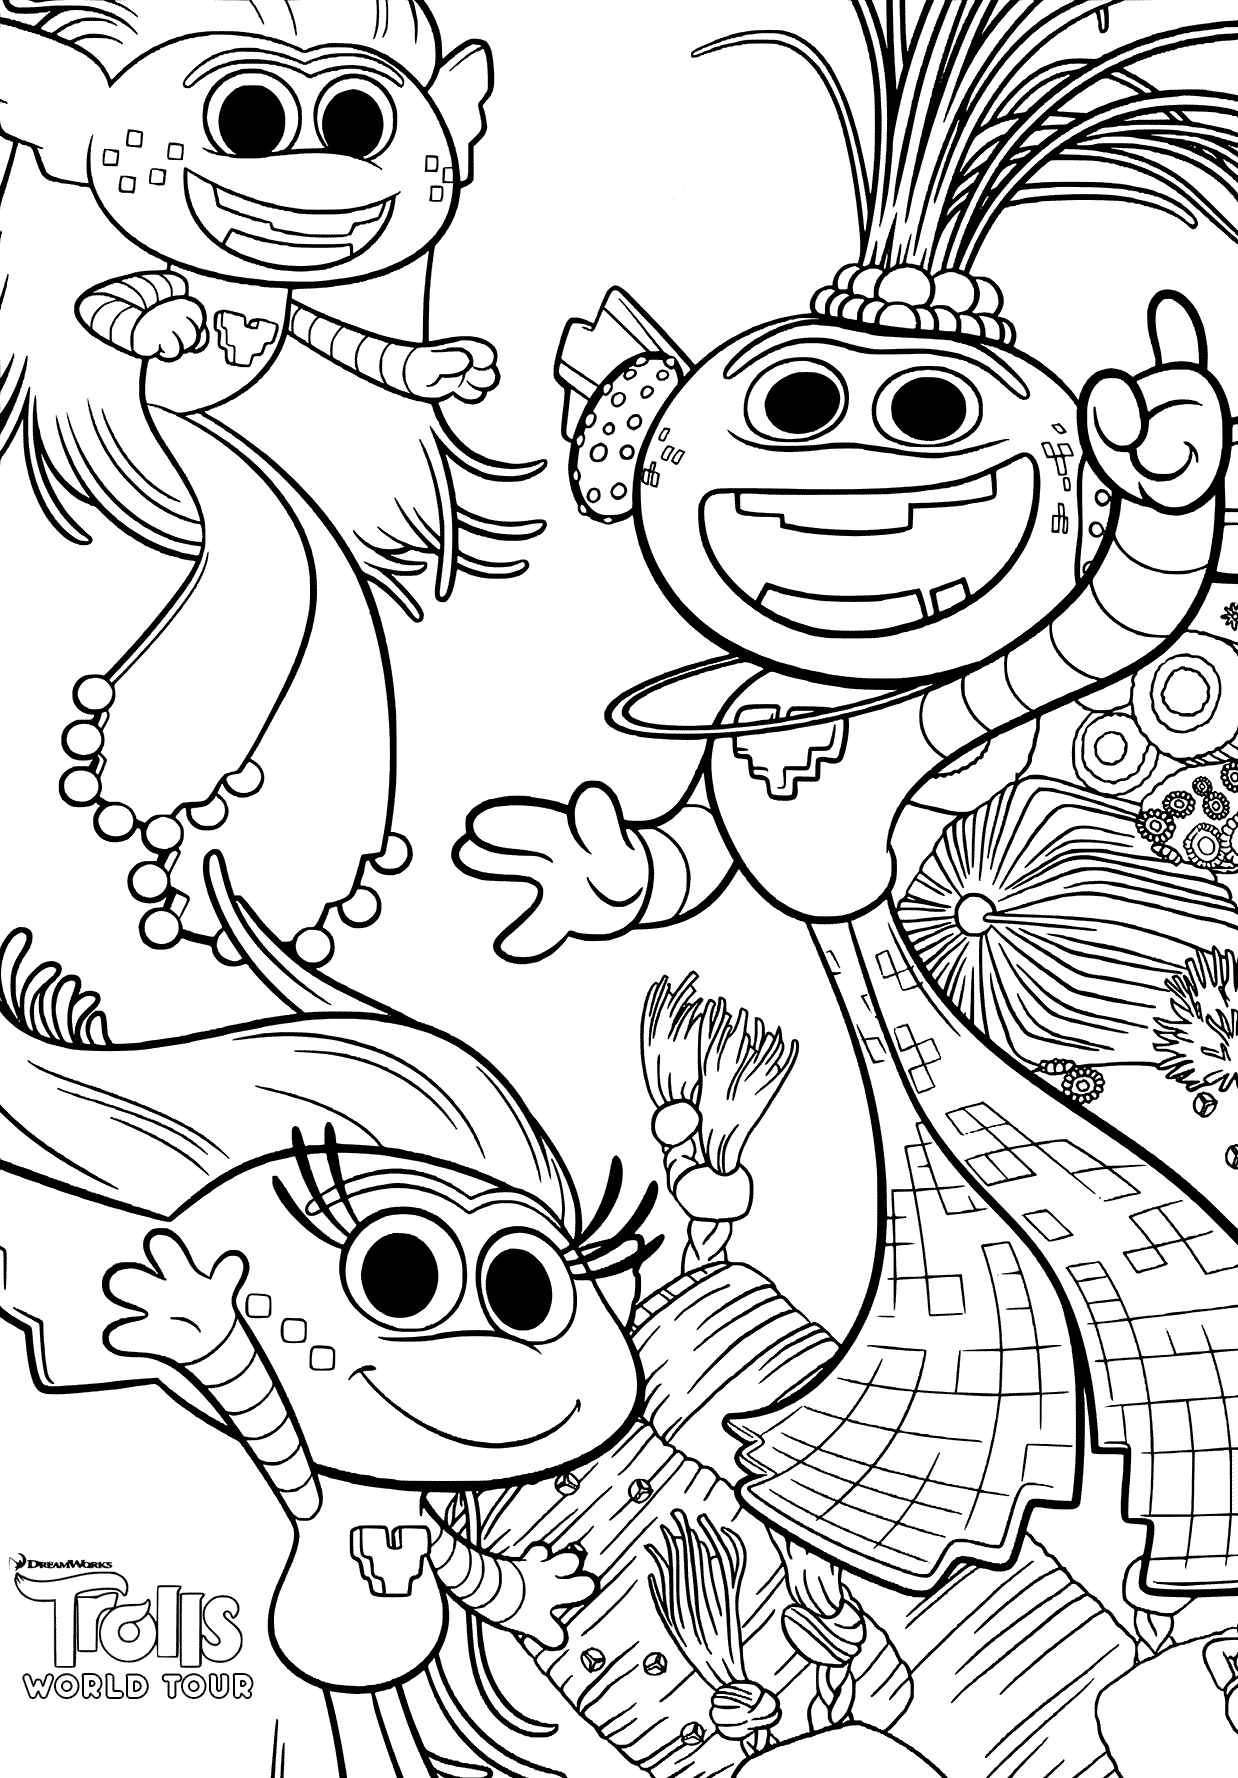 Trolls 2 World Tour Coloring Page